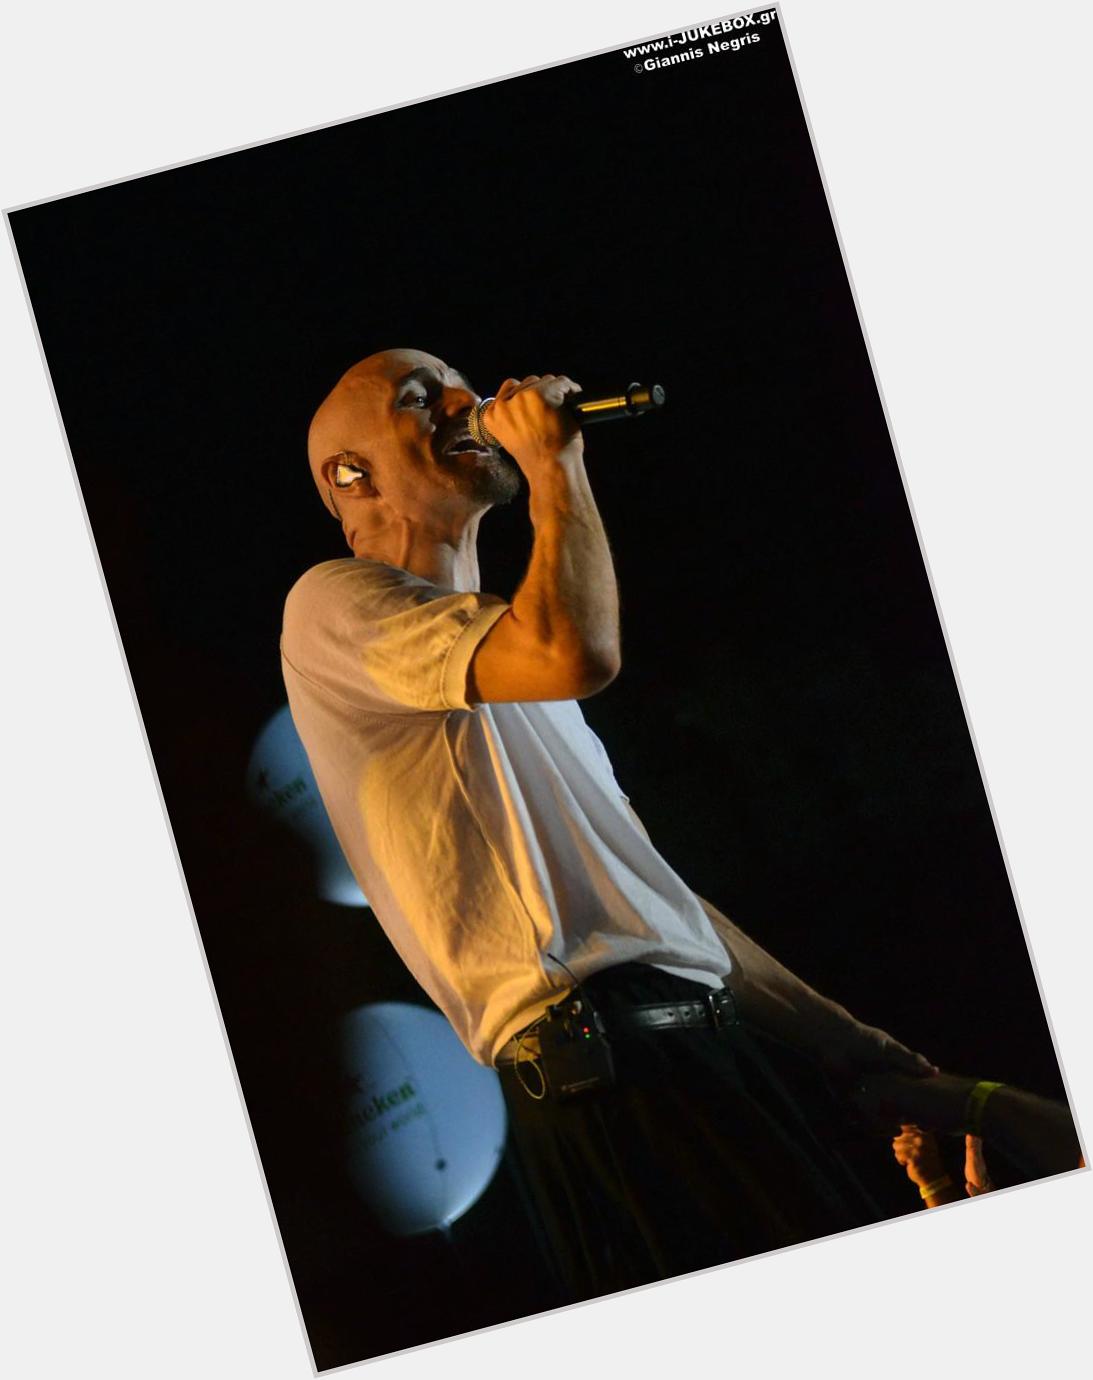 Happy 55th birthday to TIM BOOTH of JAMES!  